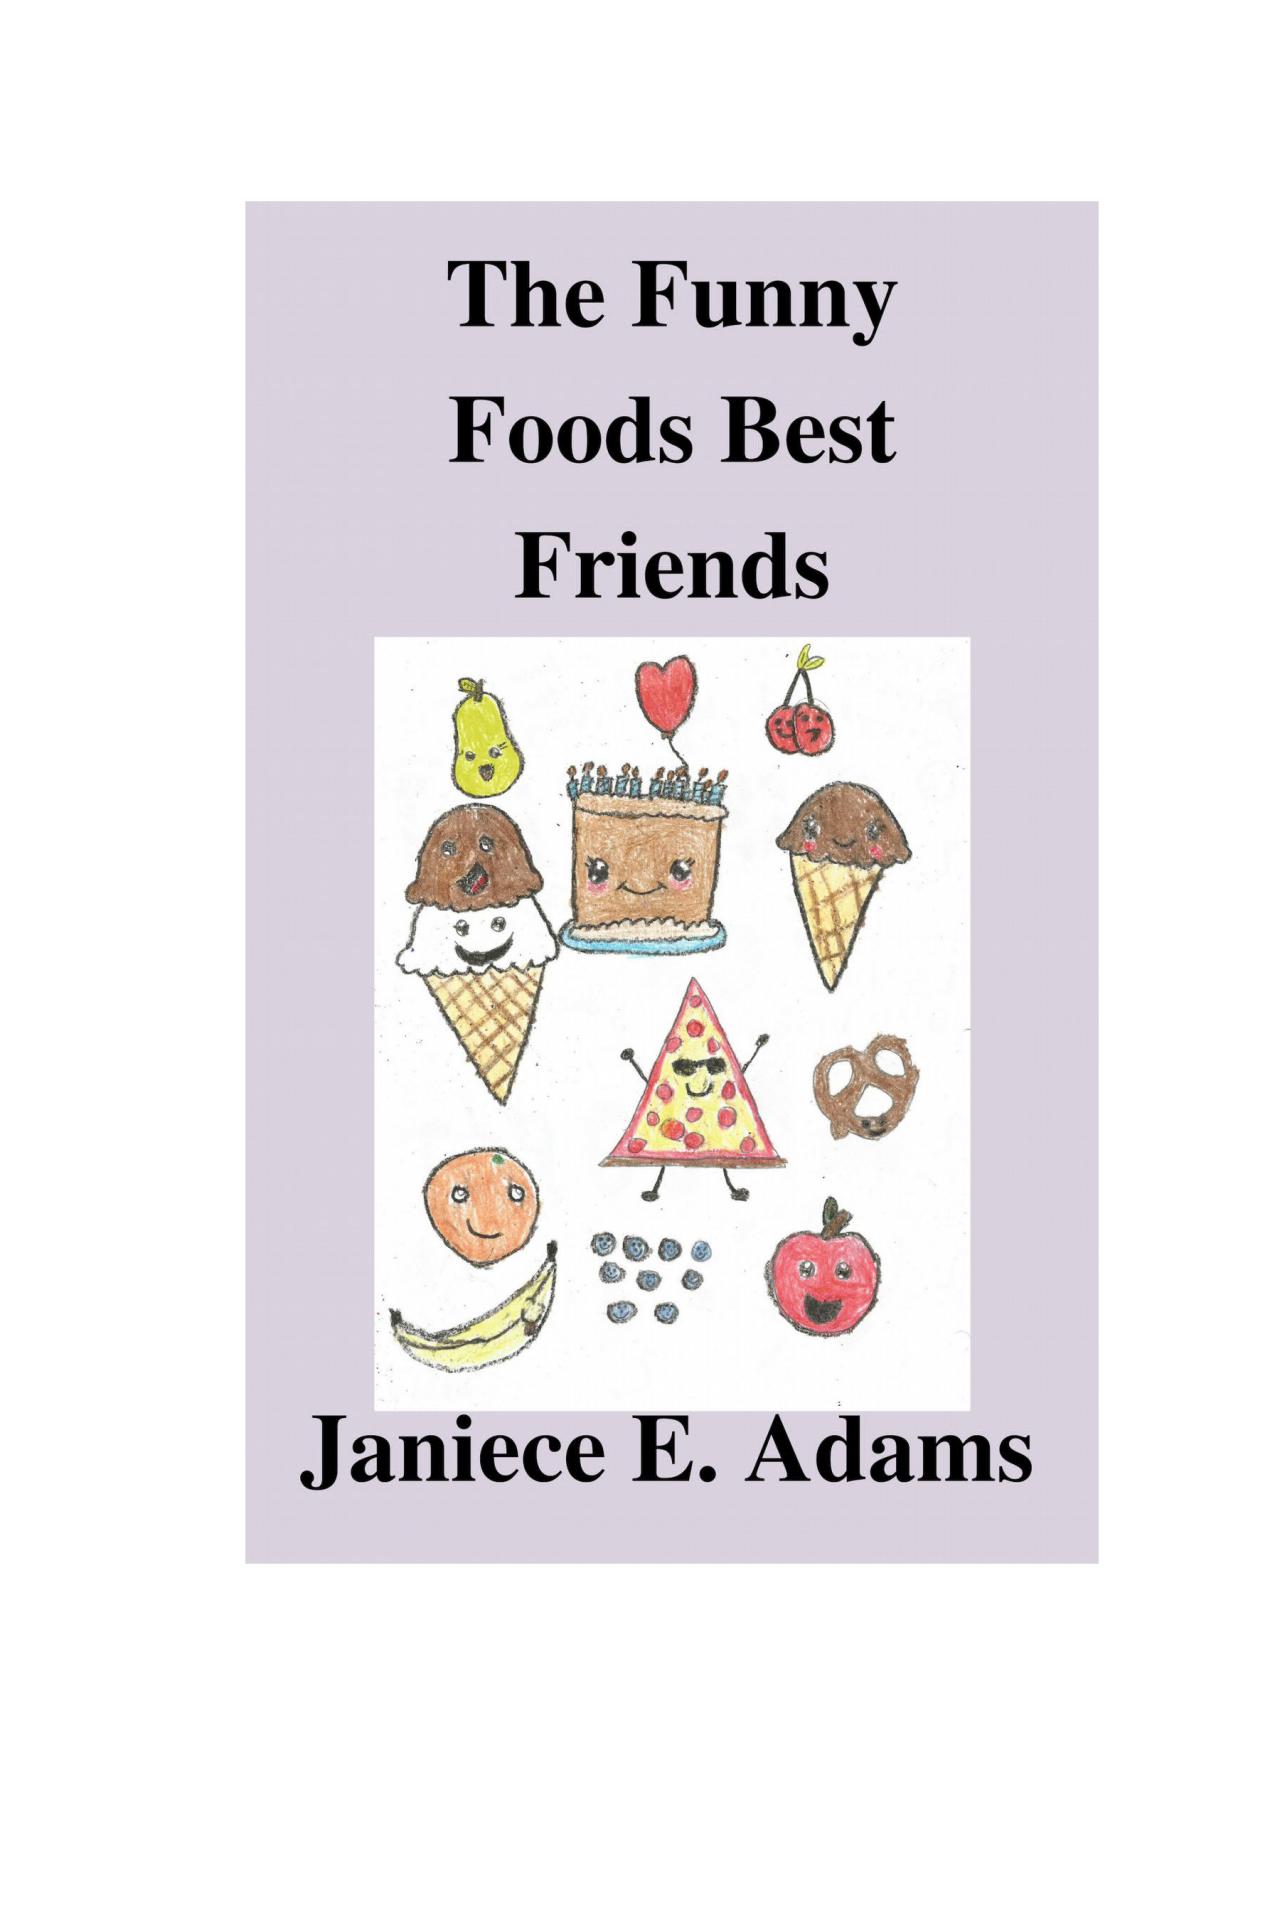 FREE: The Funny Foods Best Friends by Janiece E. Adams